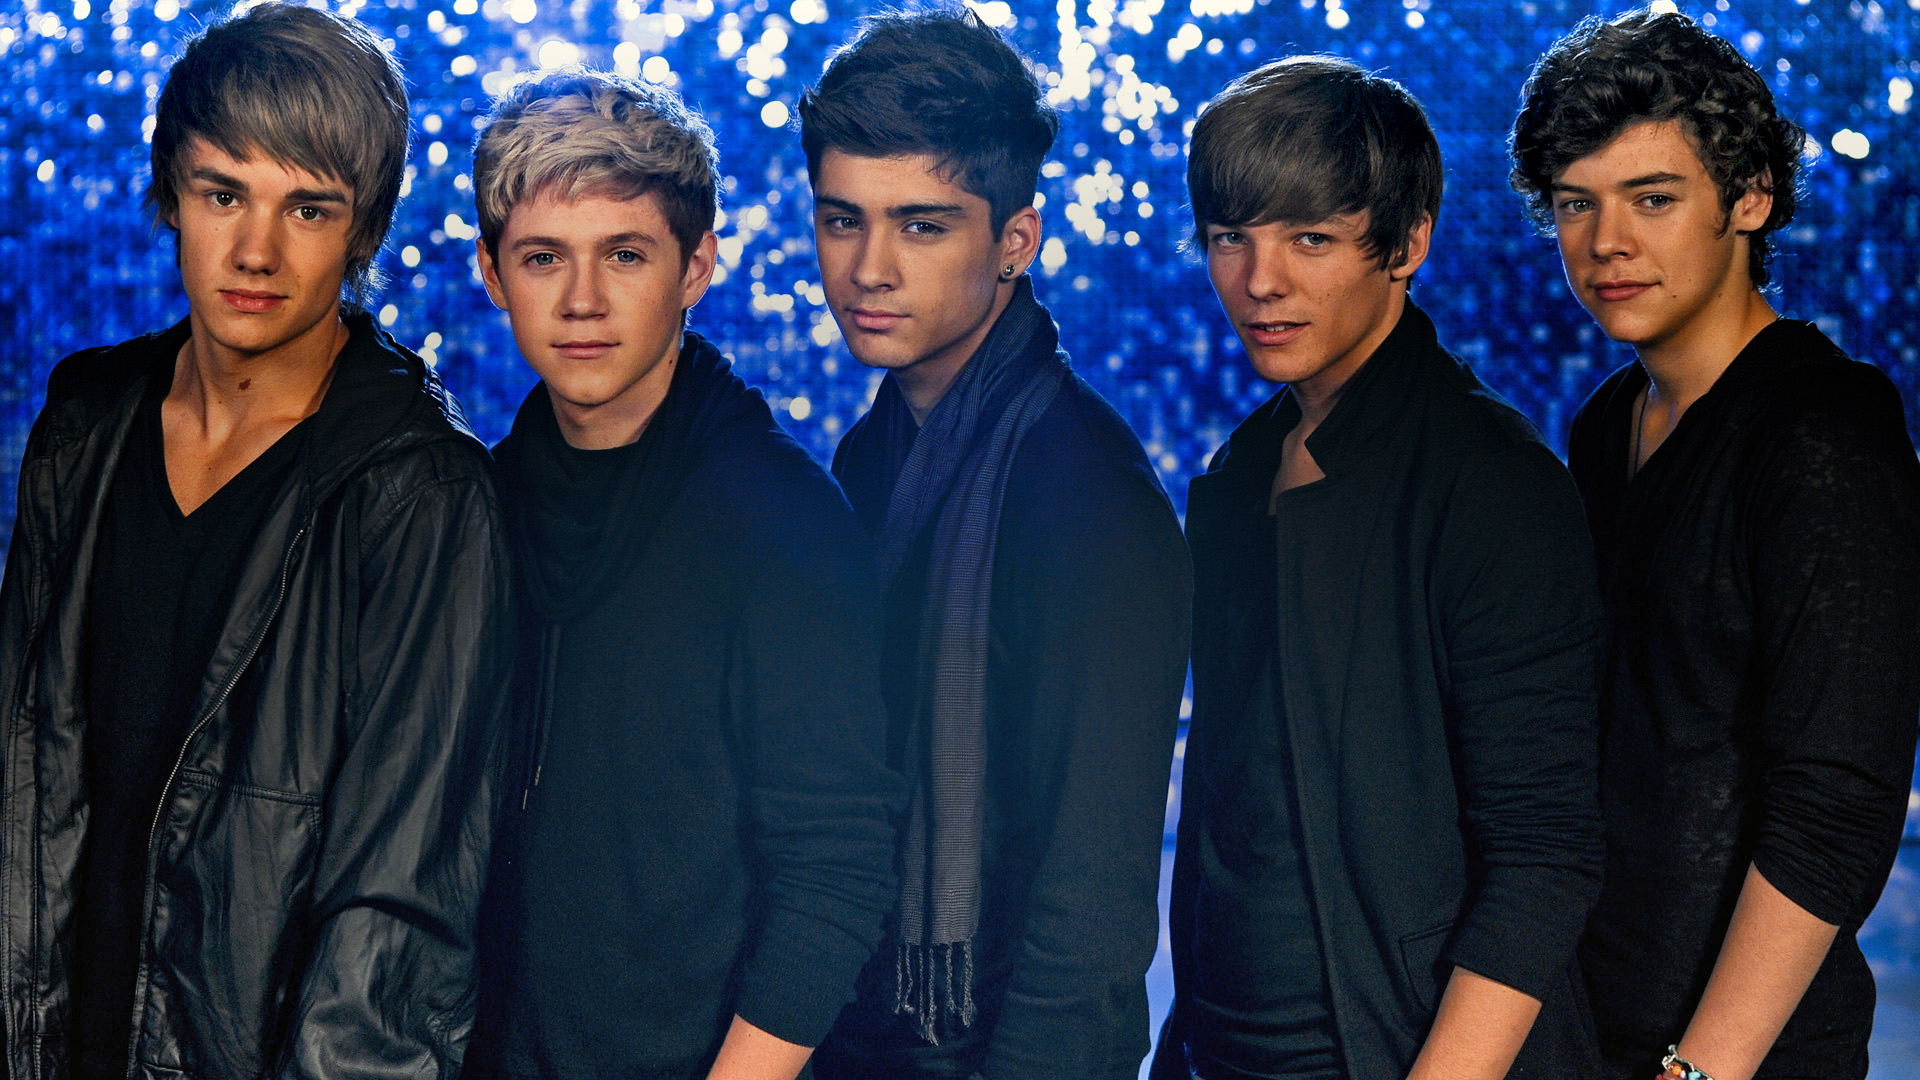 One Direction HD Wallpaper   Wallpaper High Definition High Quality 1920x1080